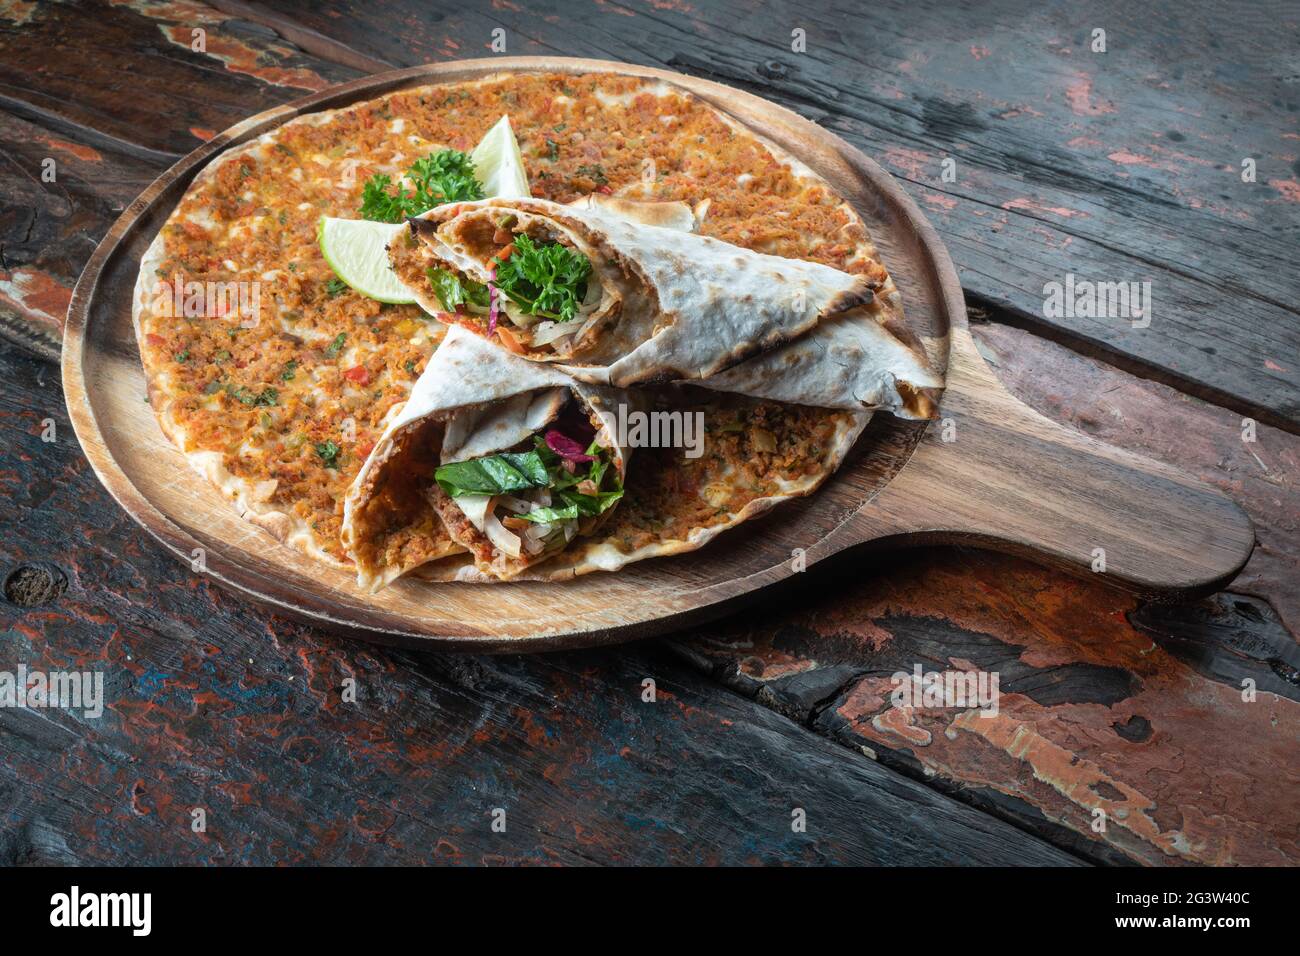 Lahmacun traditional Turkish pizza and wraps with salad on rustic wooden table Stock Photo